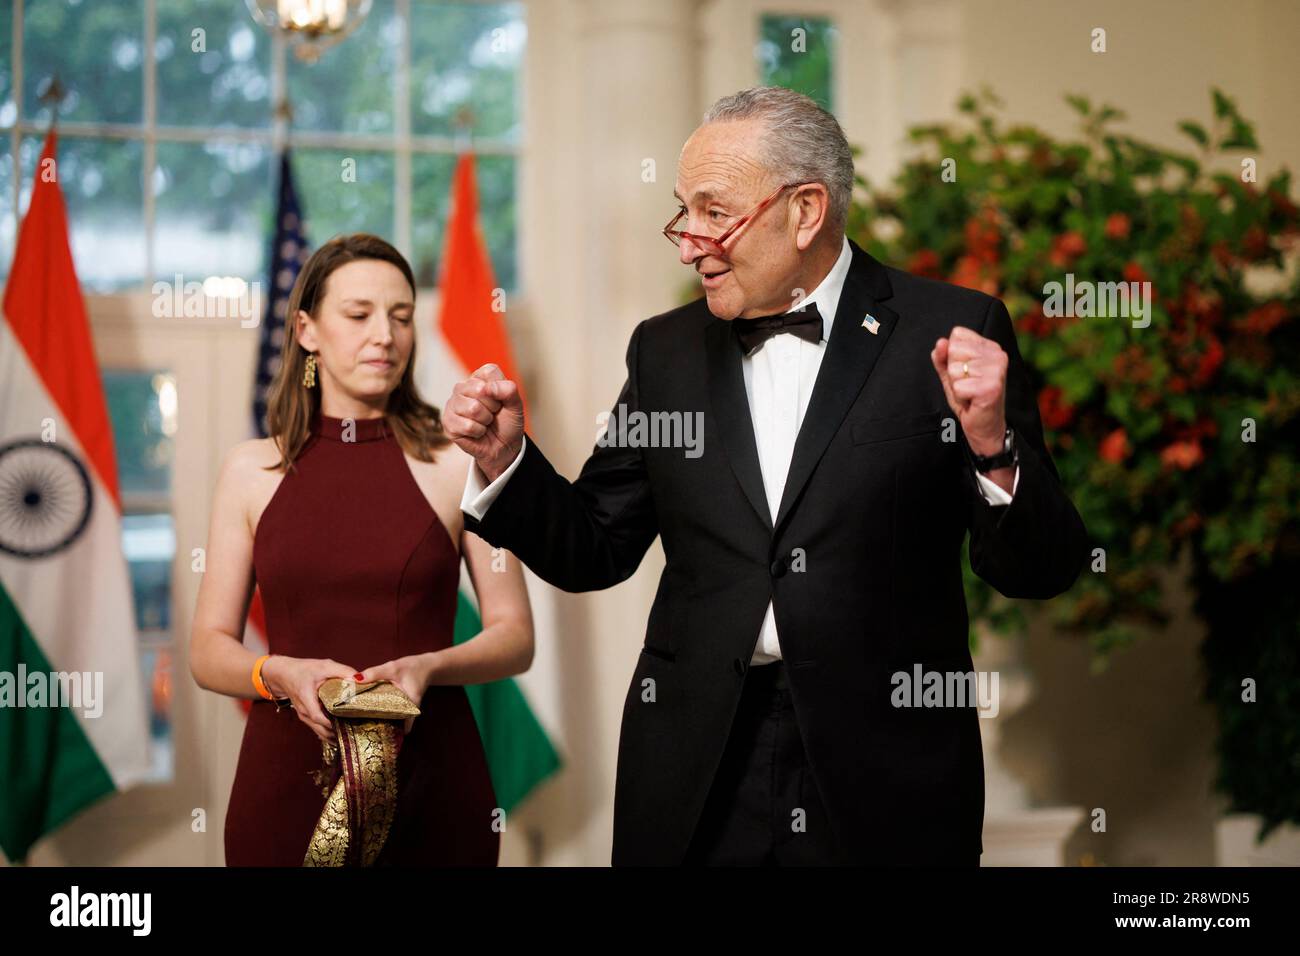 Washington, DC, US, June 22, 2023. Senate Majority Leader Chuck Schumer, a Democrat from New York, right, and Elizabeth Weiland, arrive to attend a state dinner in honor of Indian Prime Minister Narendra Modi hosted by US President Joe Biden and First Lady Jill Biden at the White House in Washington, DC, US, on Thursday, June 22, 2023. Biden and Modi announced a series of defense and commercial deals designed to improve military and economic ties between their nations during a state visit at the White House today. Photo by Ting Shen/Pool/ABACAPRESS.COM Stock Photo